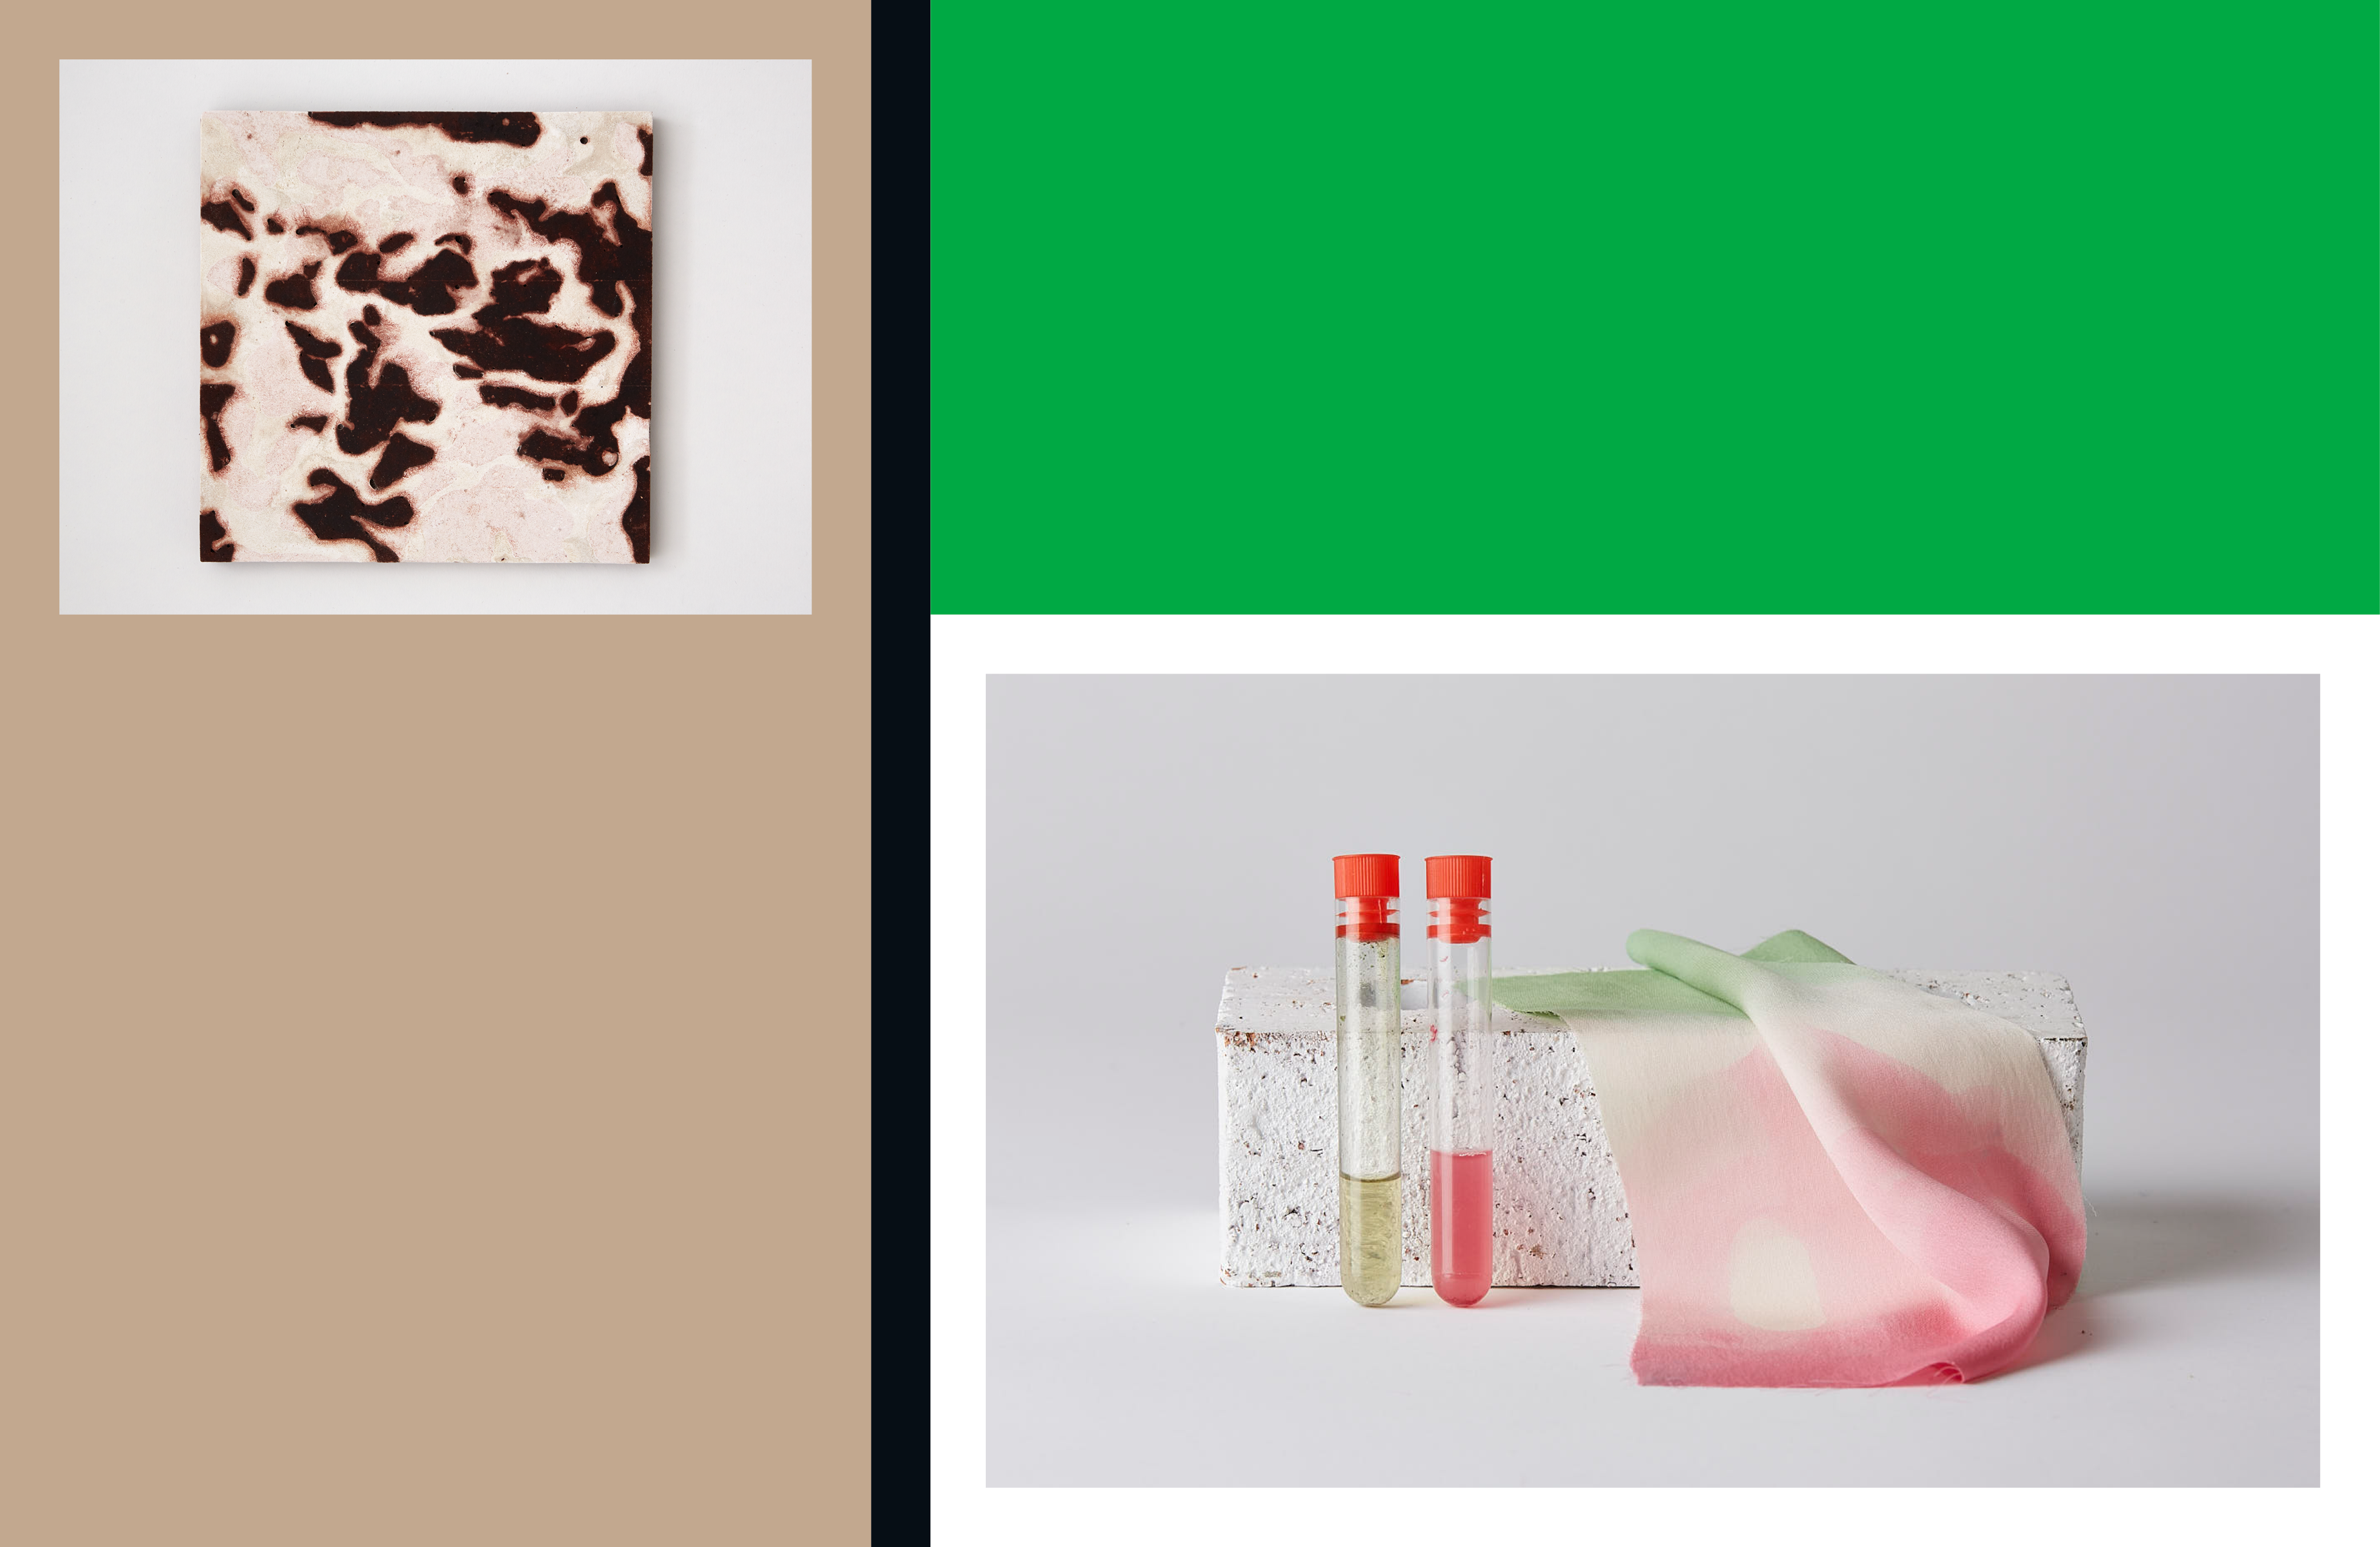 Composite image with green and brown blocks and two images of work (one brown tile and one red material with glass vials)